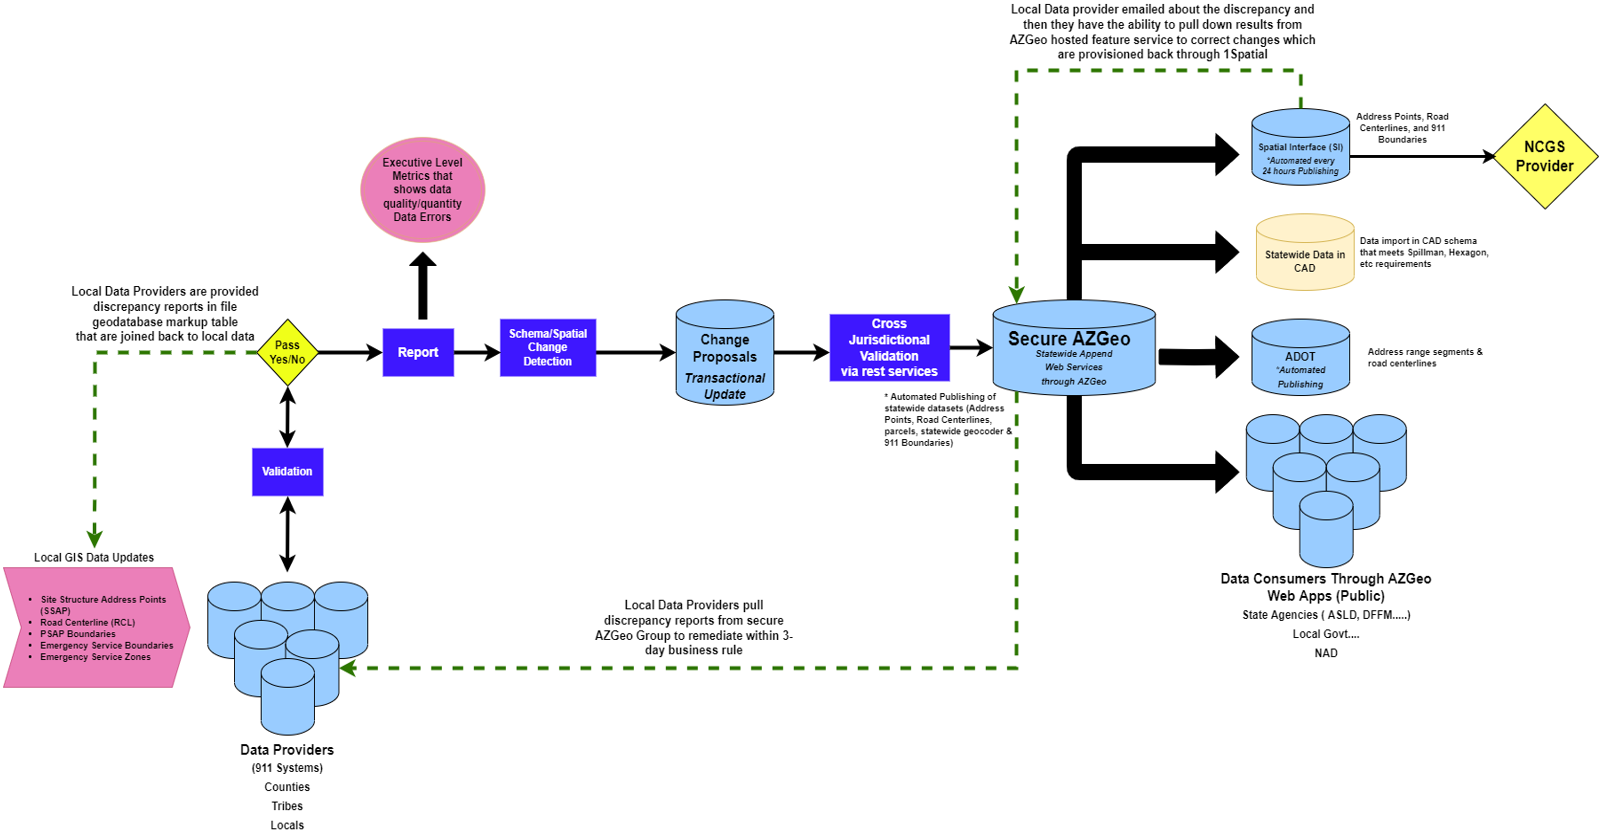 Workflow chart of the AZ Data Supply Chain Strategy from the Arizona Department of Administration showing how corrections and updates are made to the secure GIS data in the AZGeo database.